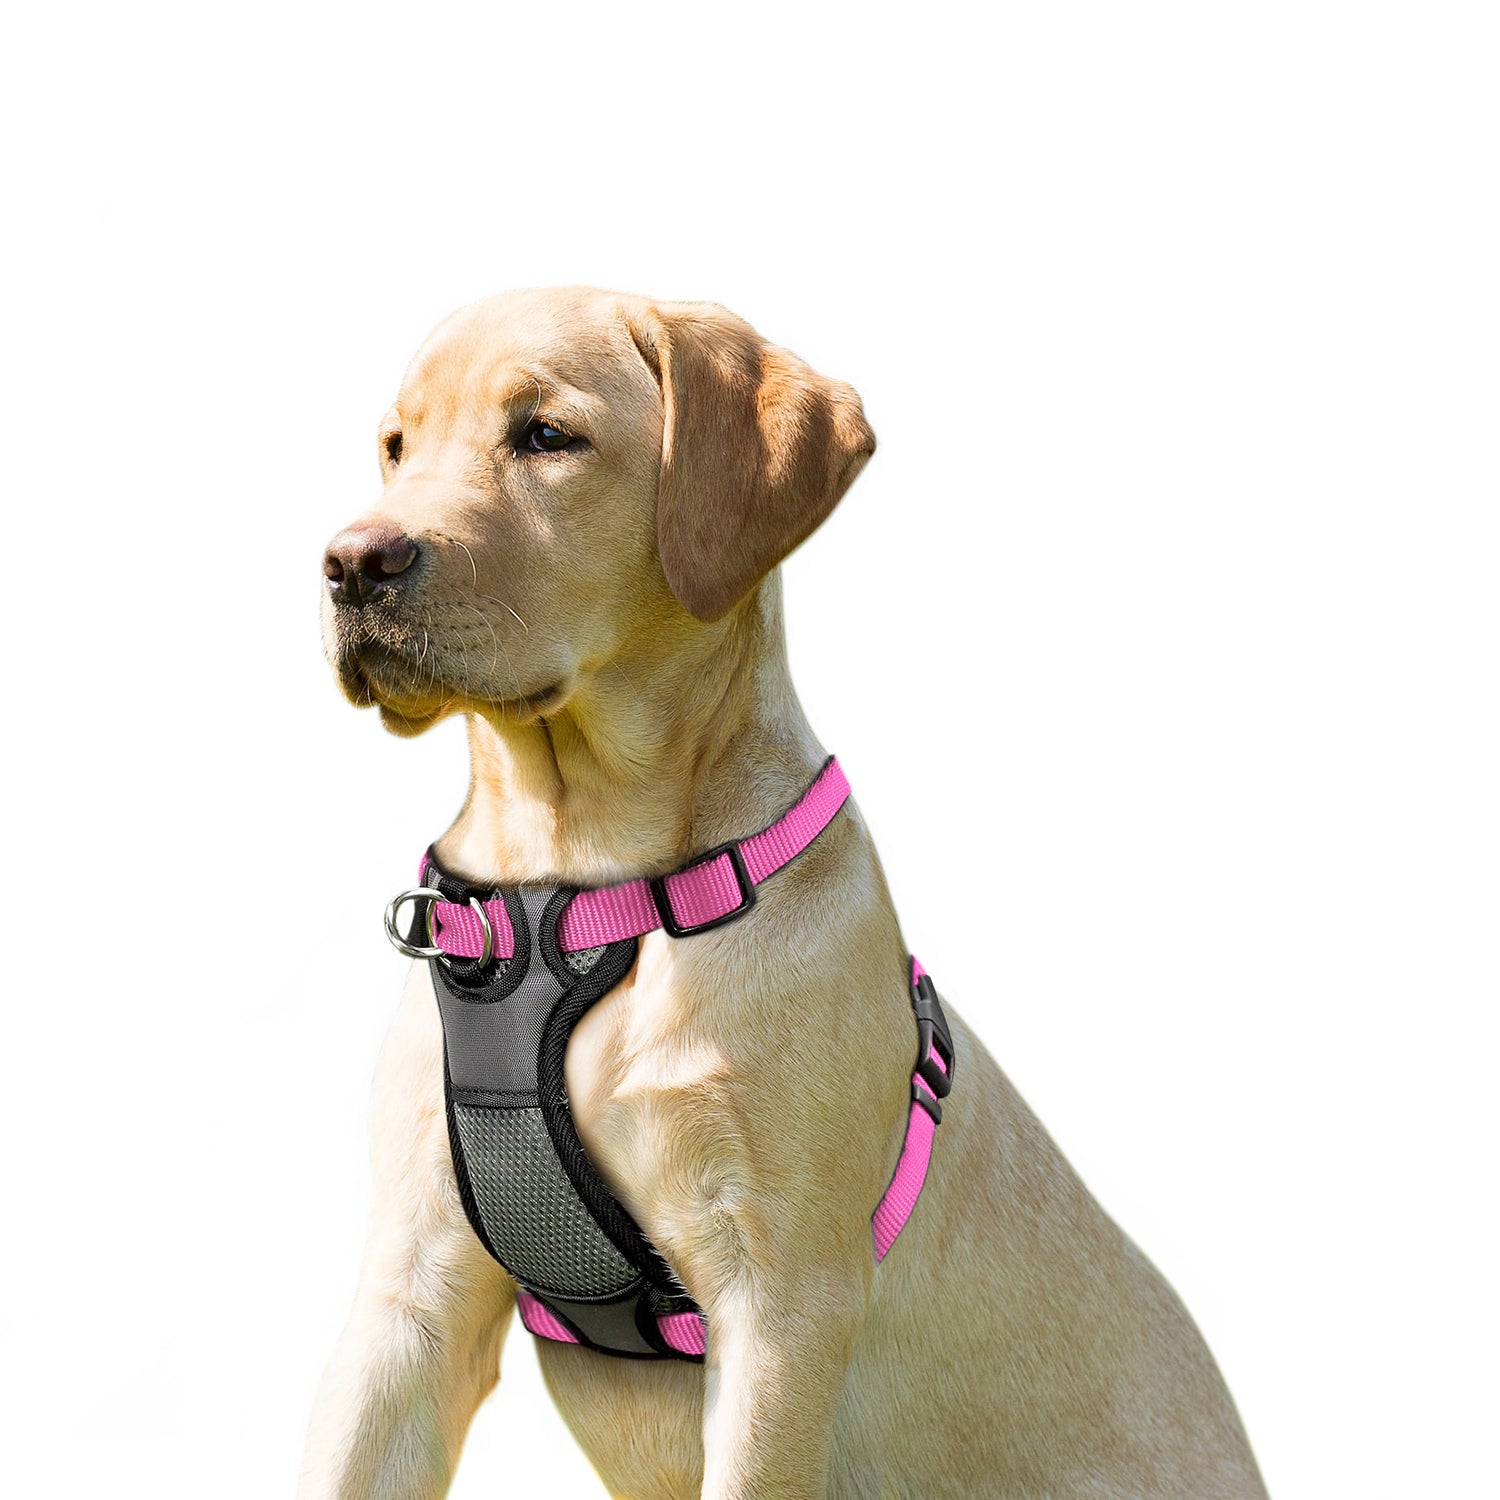 JESPET Dog Harness No Pull with Adjustable Straps for Training, Pink